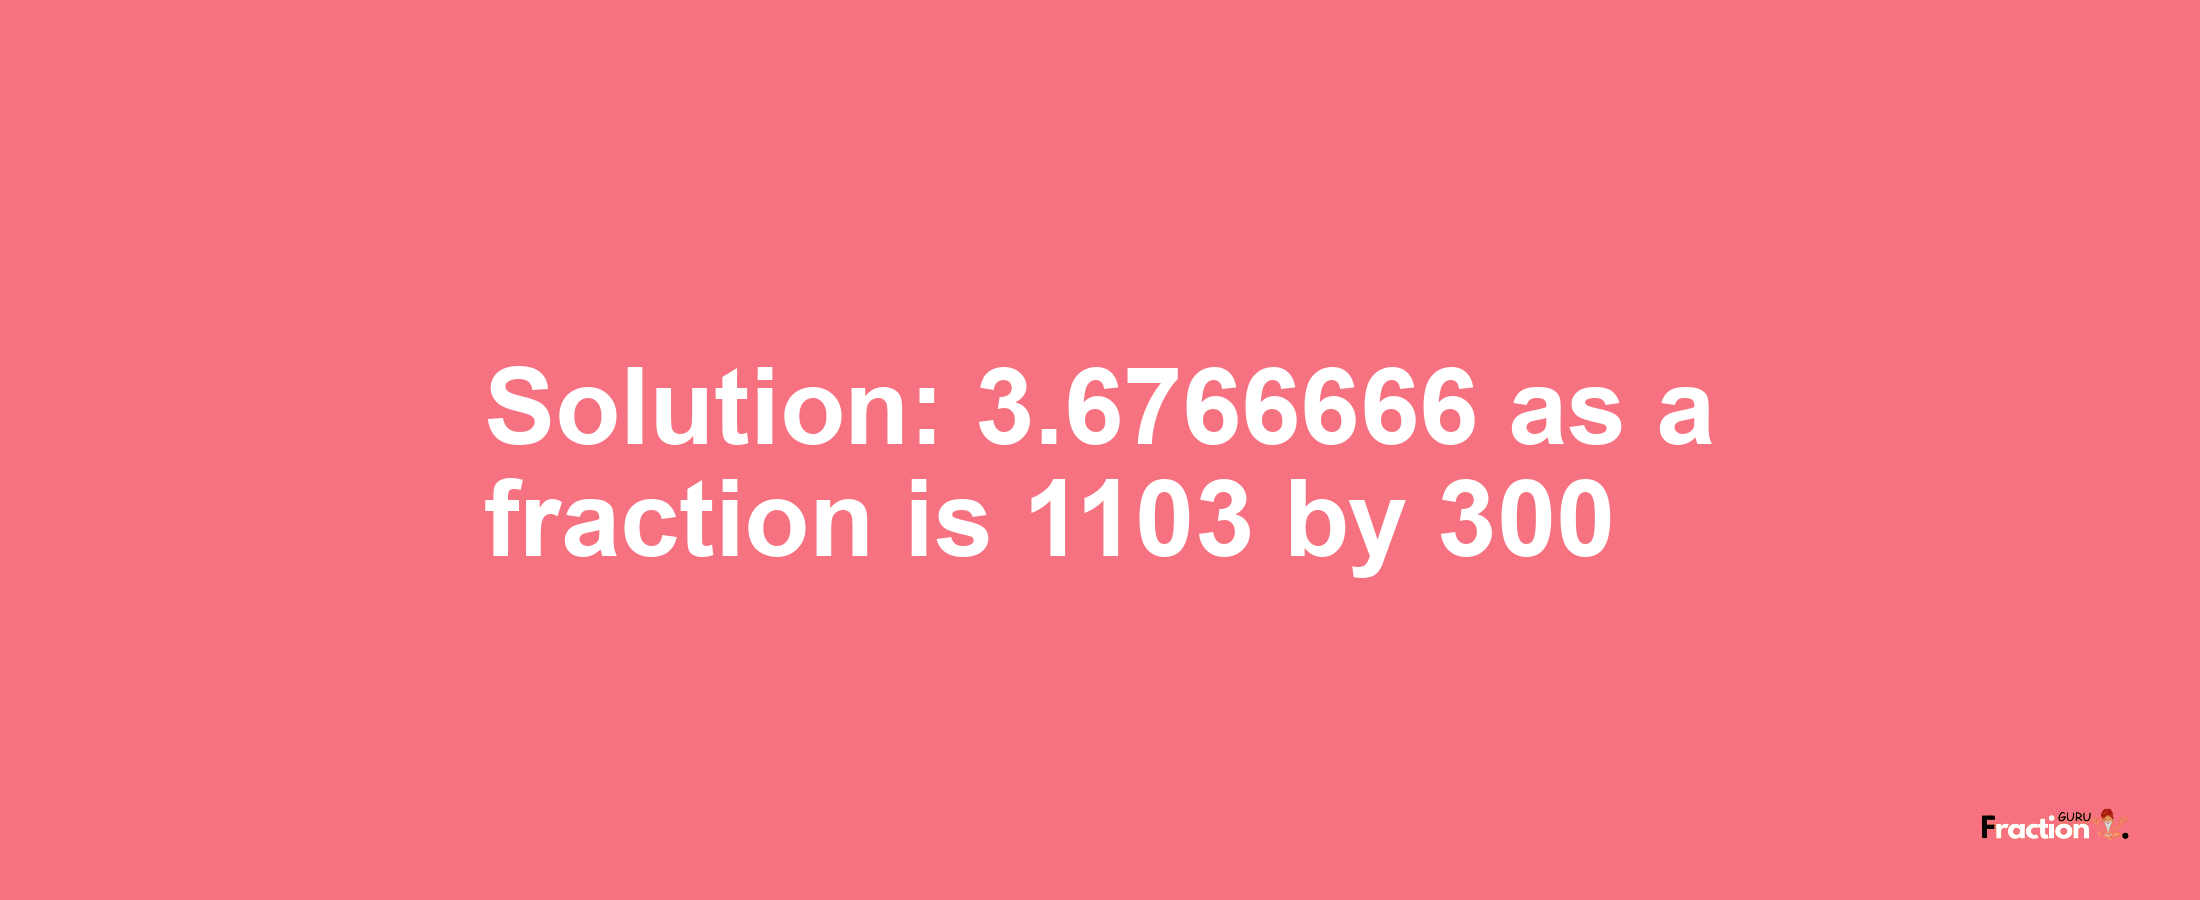 Solution:3.6766666 as a fraction is 1103/300